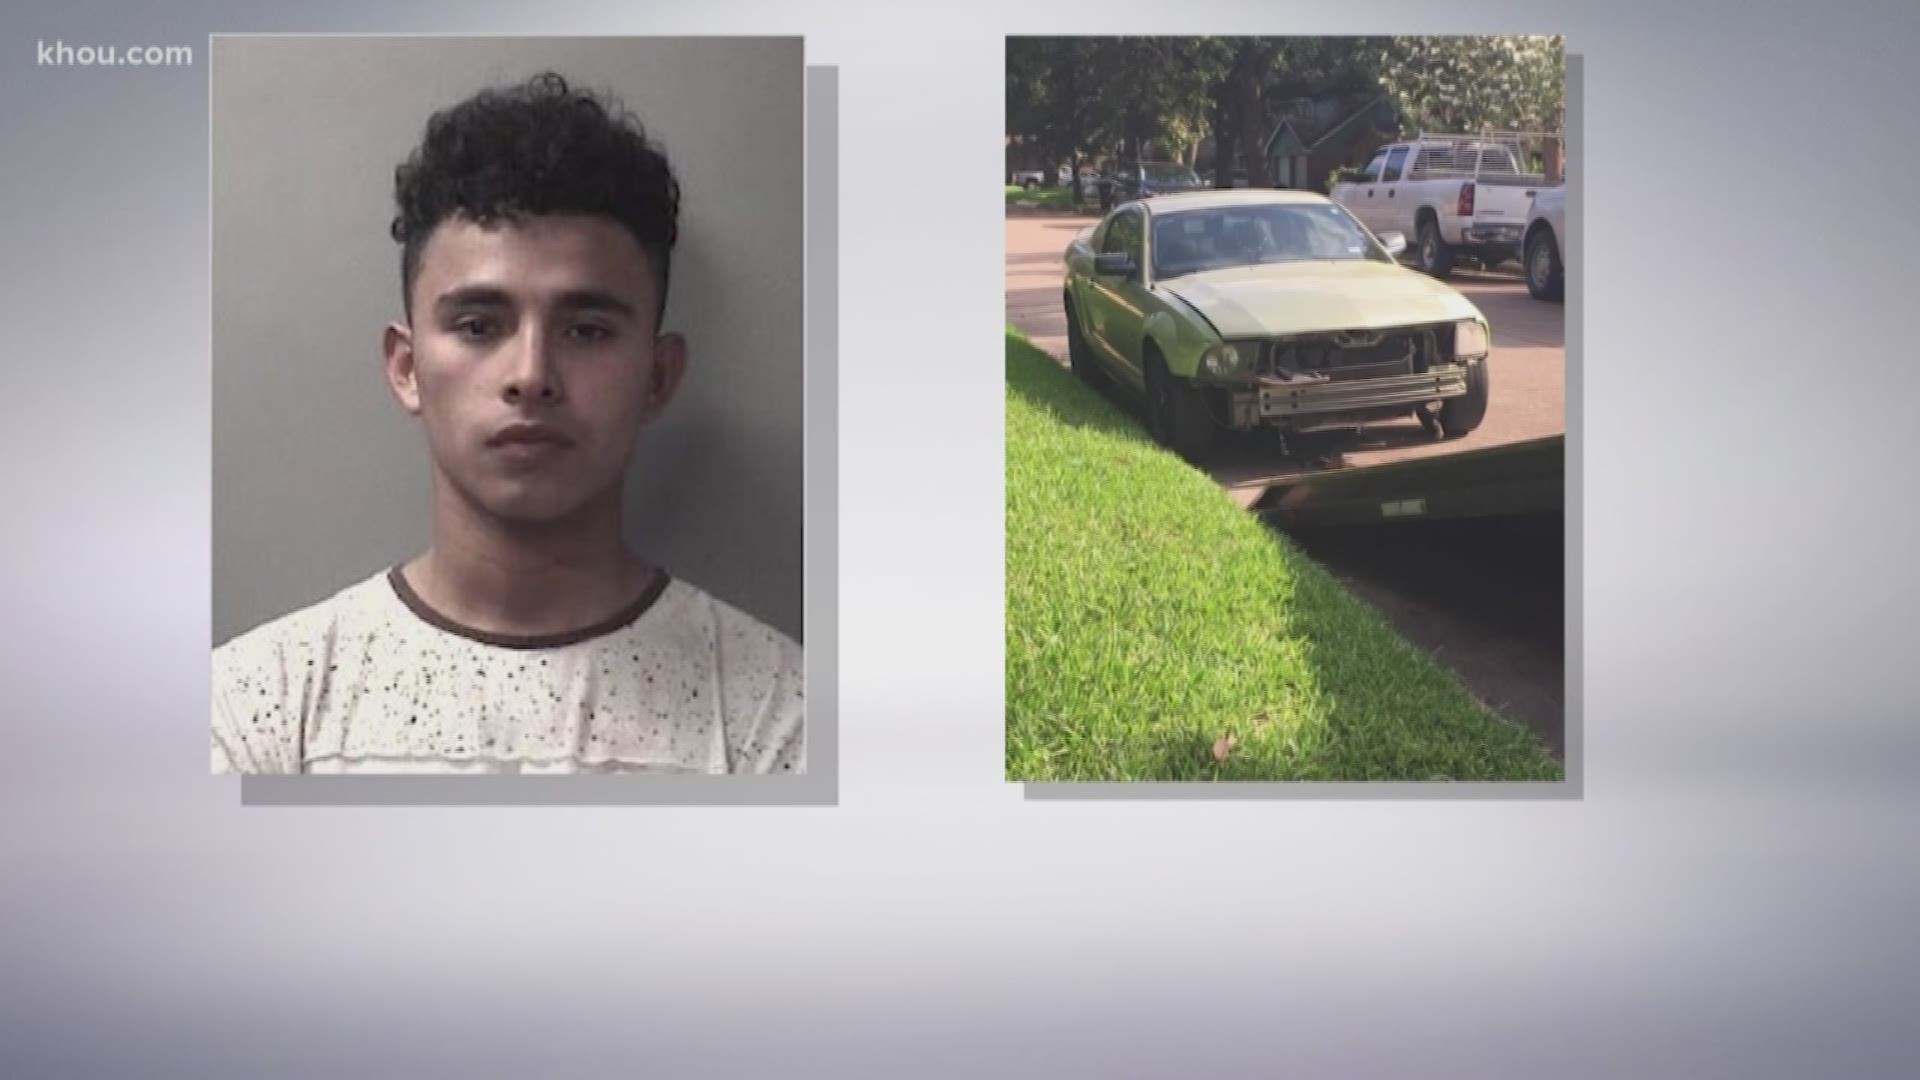 Police have arrested and charged a teenager in connection with at least one sexual assault where a woman was targeted as she left a Houston-area gym.